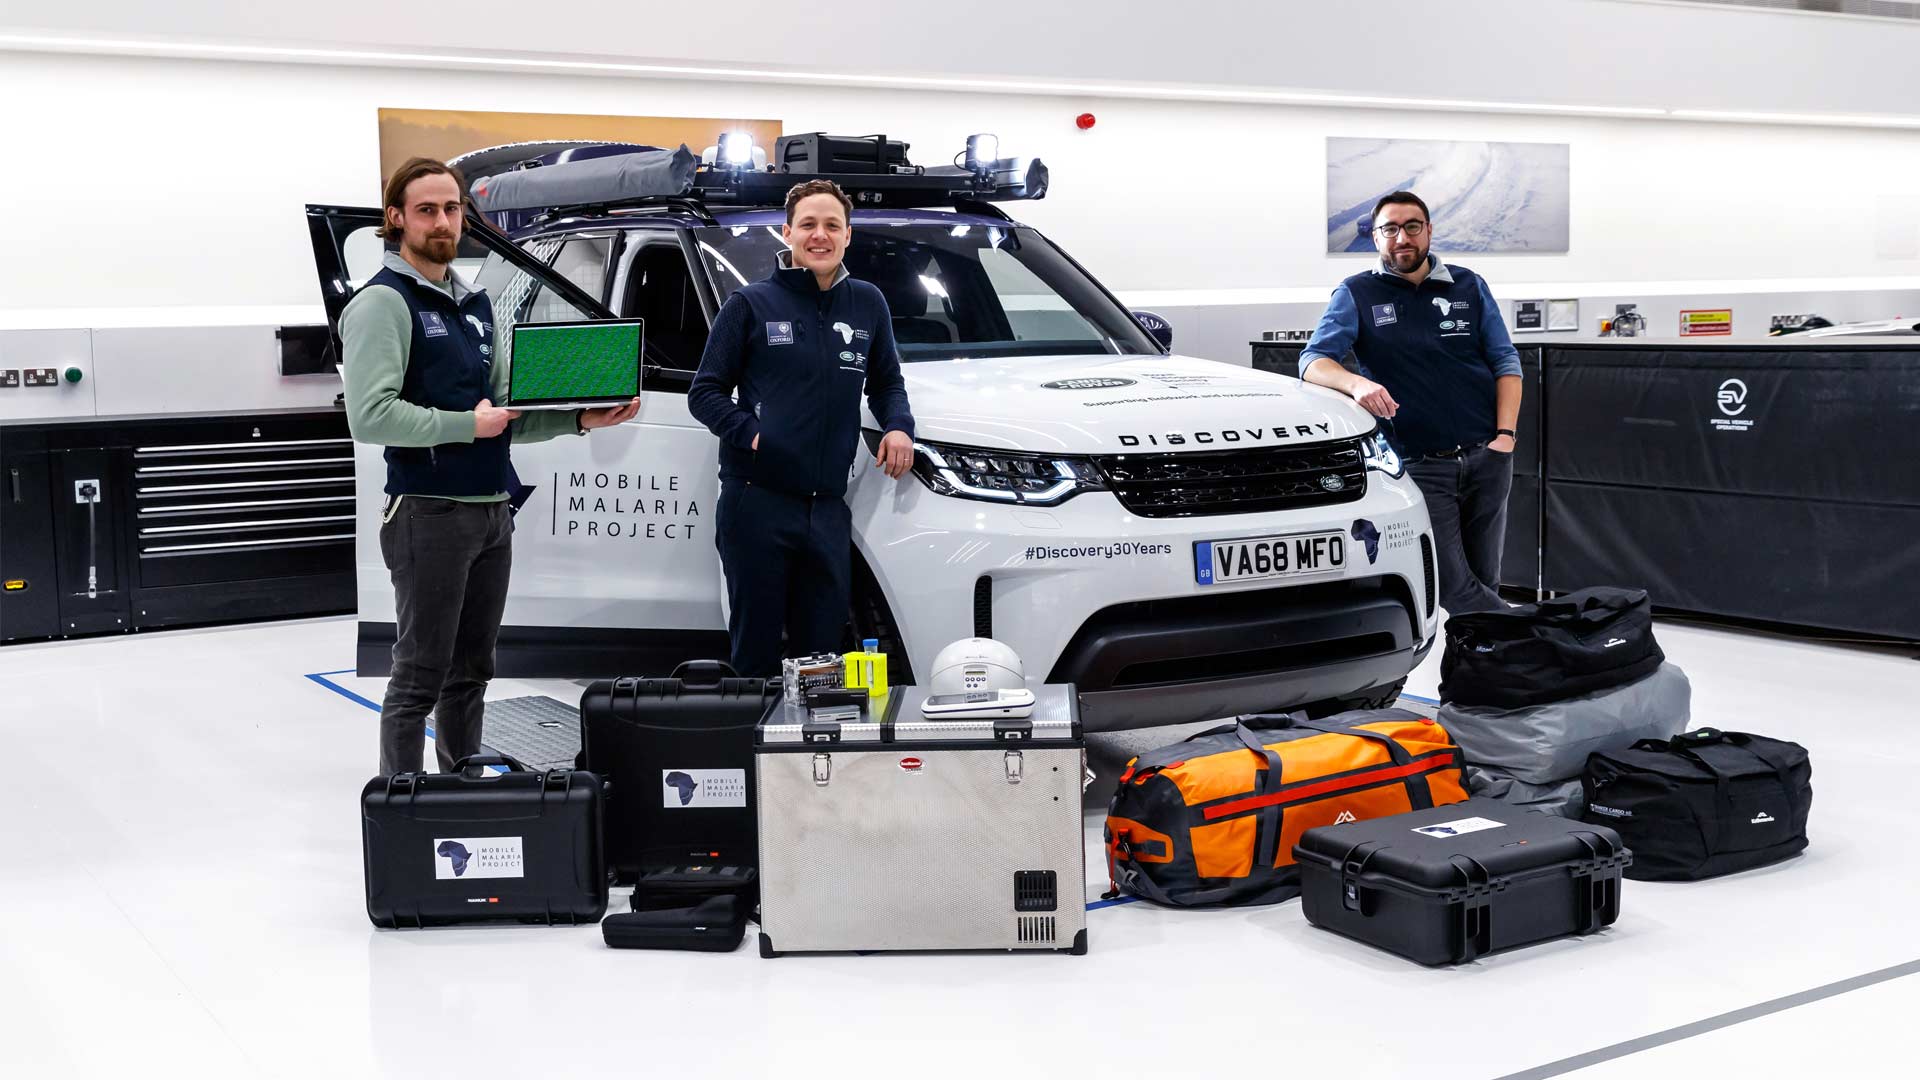 Land-Rover-Discovery Mobile Malaria Project Team Oxford University researchers